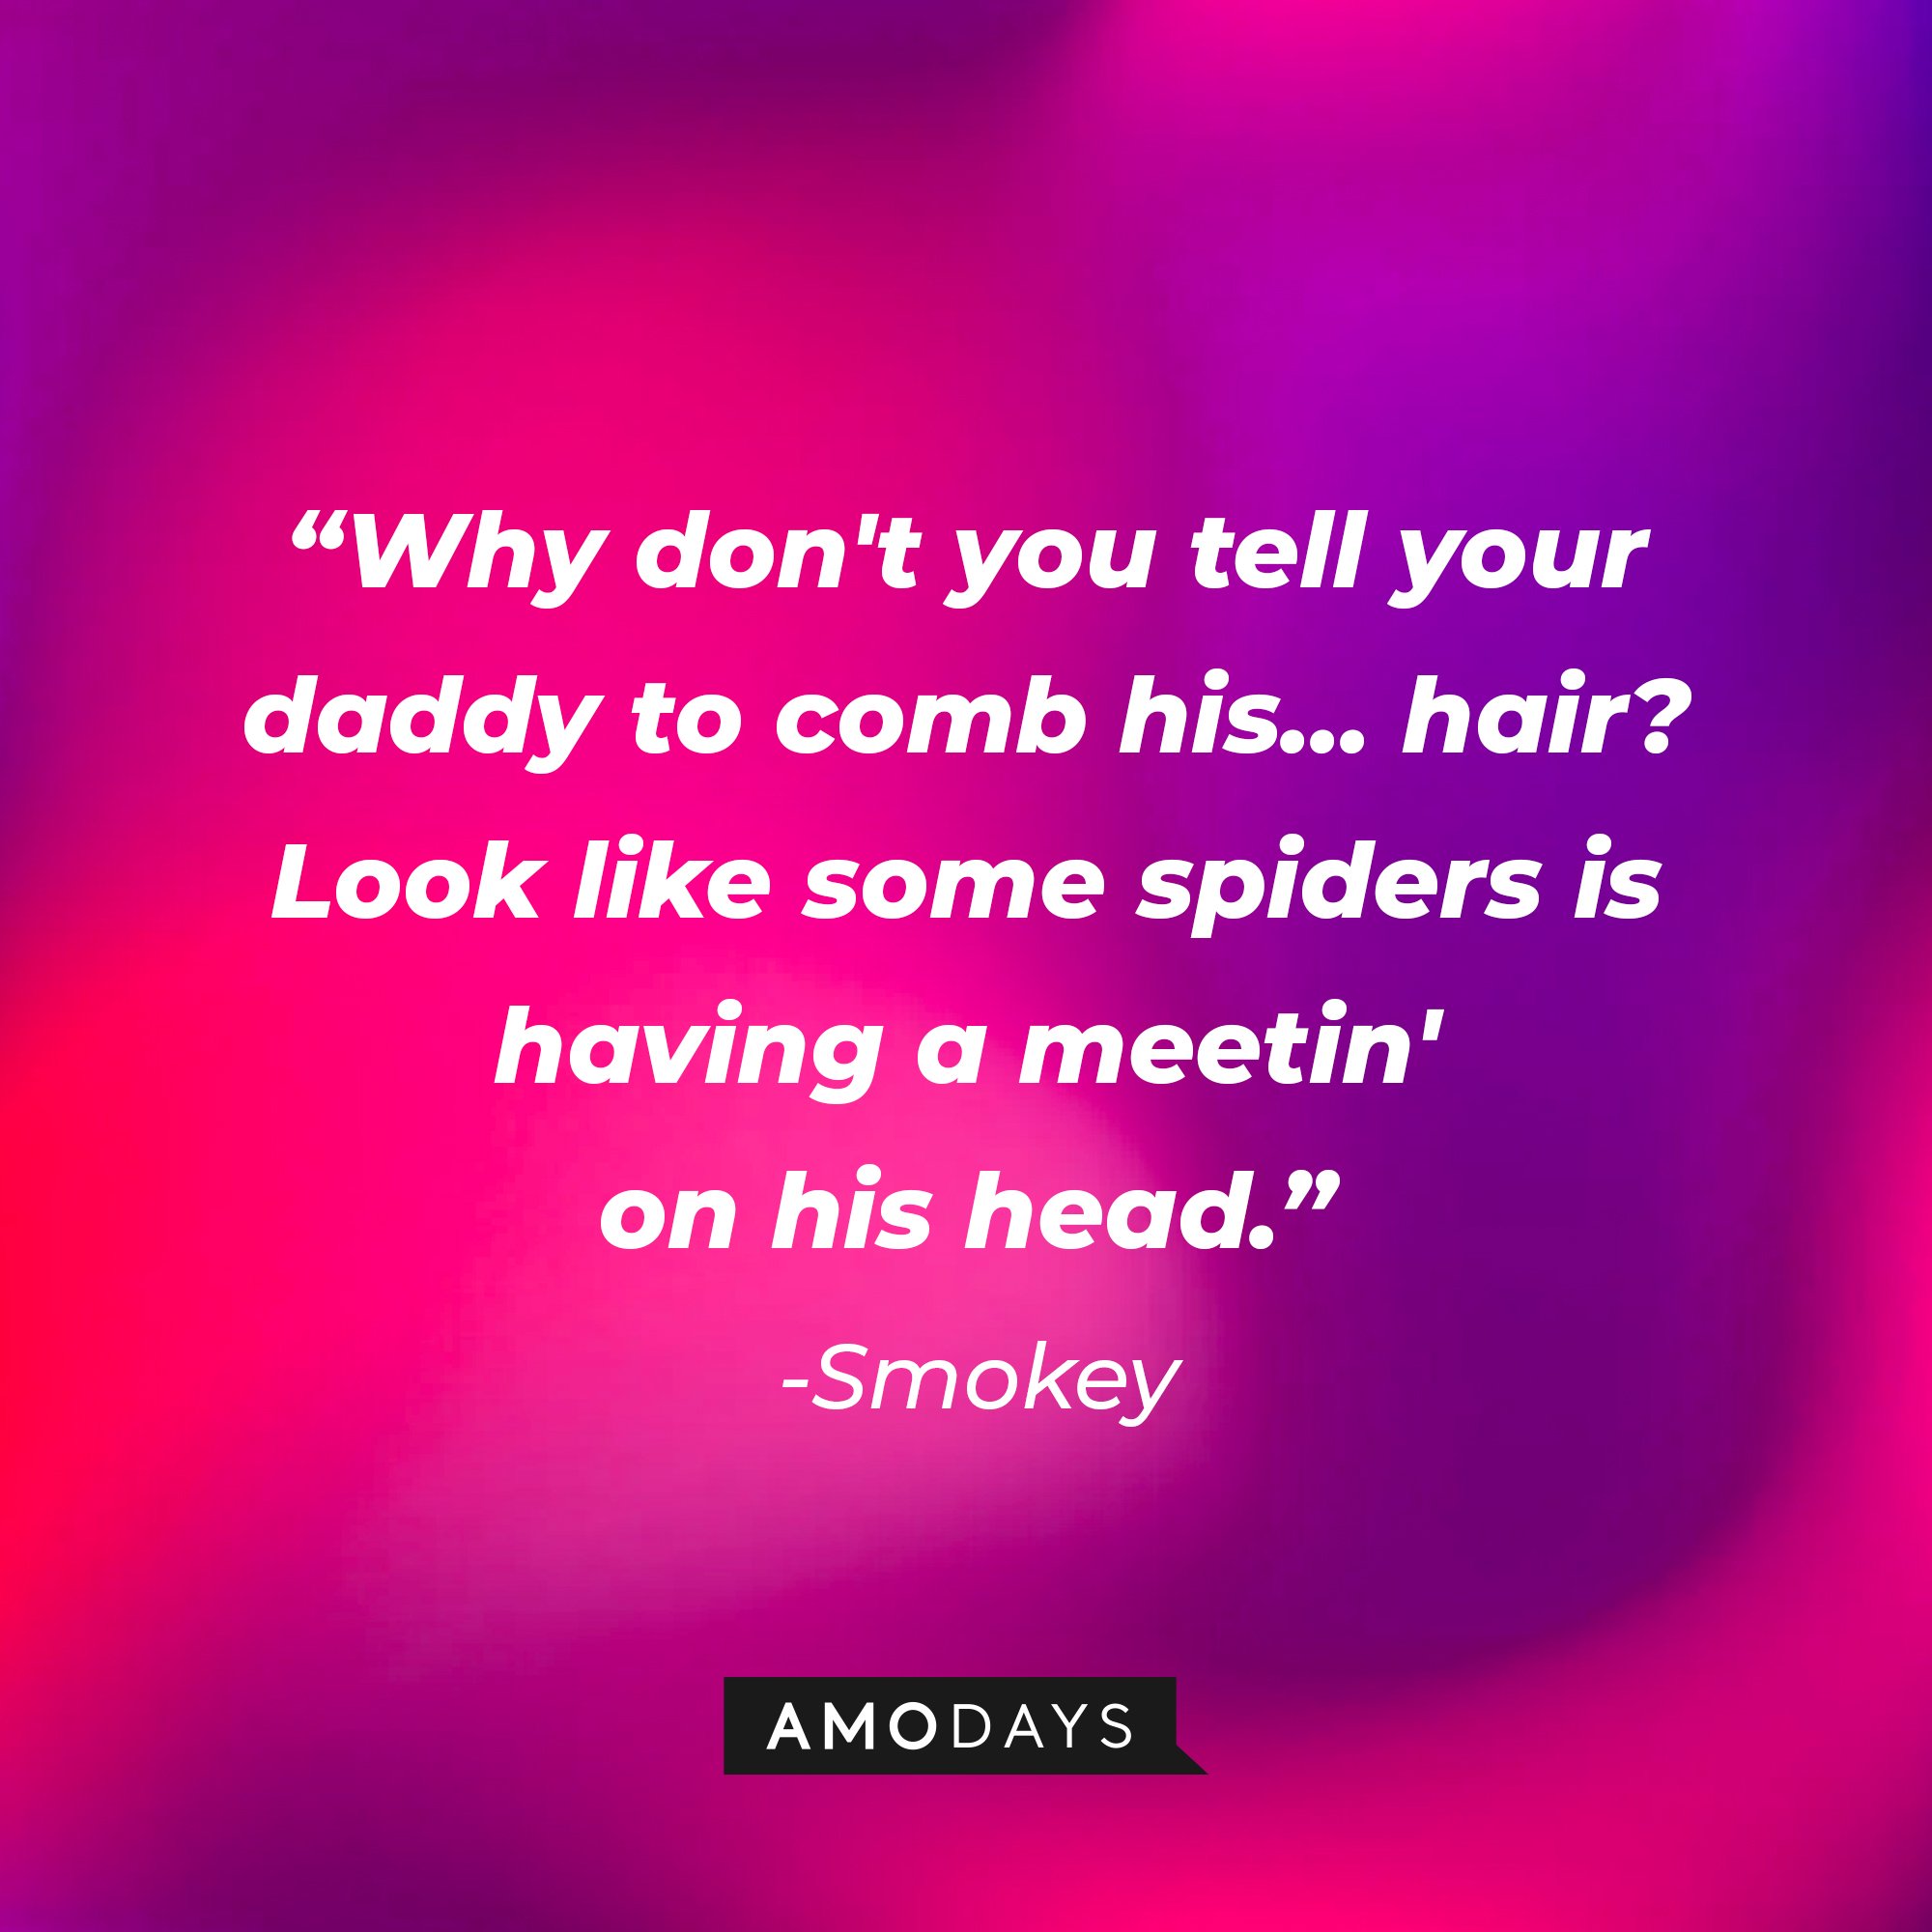 Smokeys’ quote: "Why don't you tell your daddy to comb his… hair? Look like some spiders is having a meetin' on his head." | Image: AmoDays